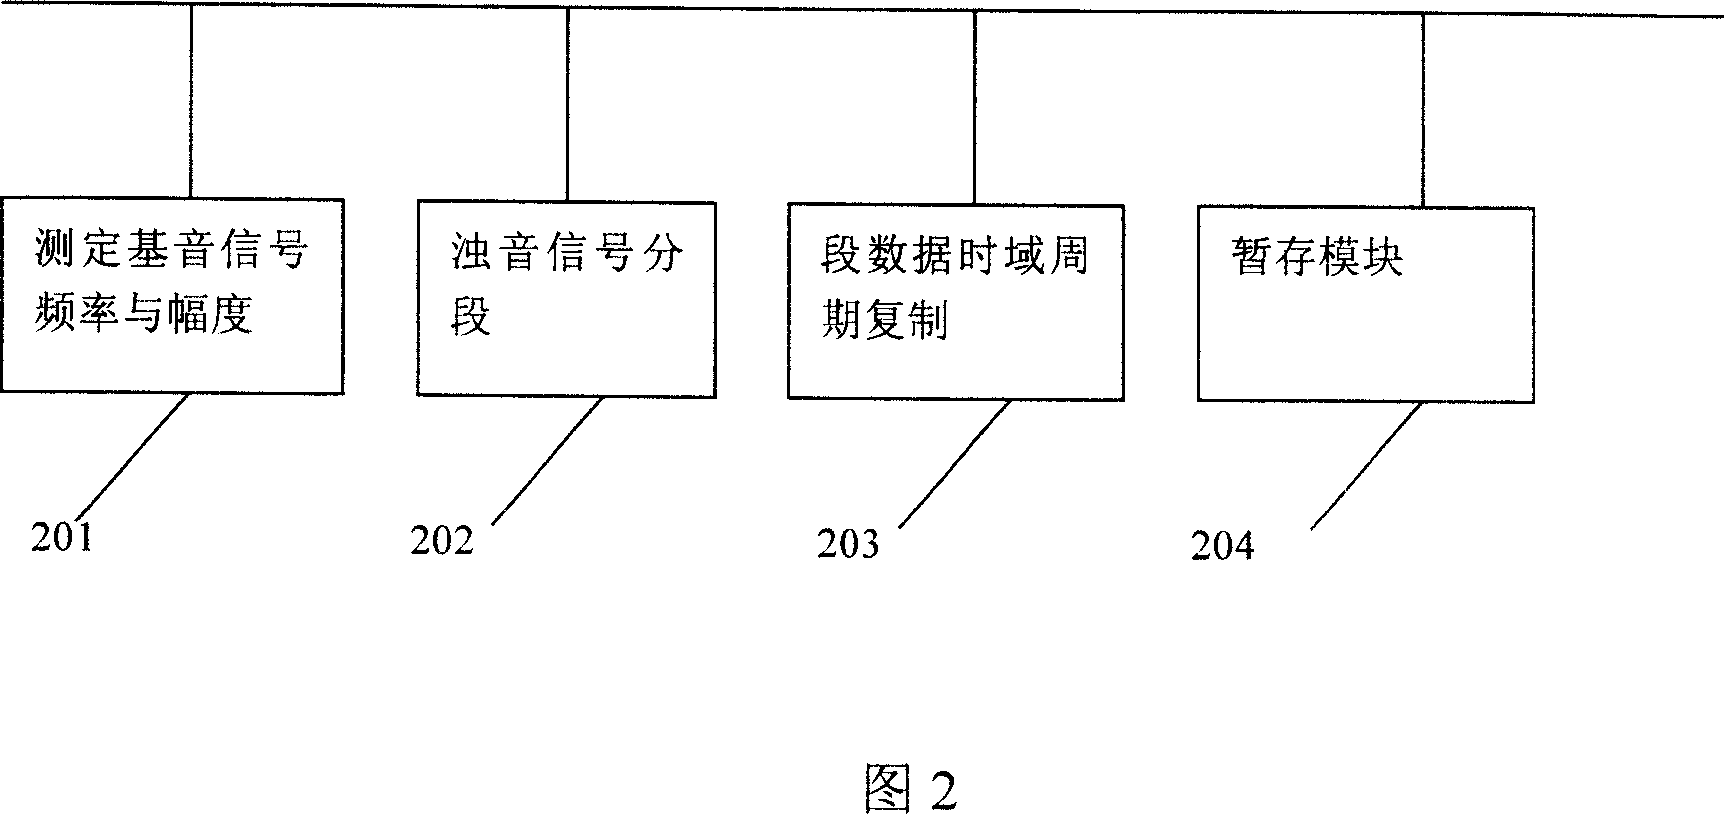 Phoneme based voice recognition method and system